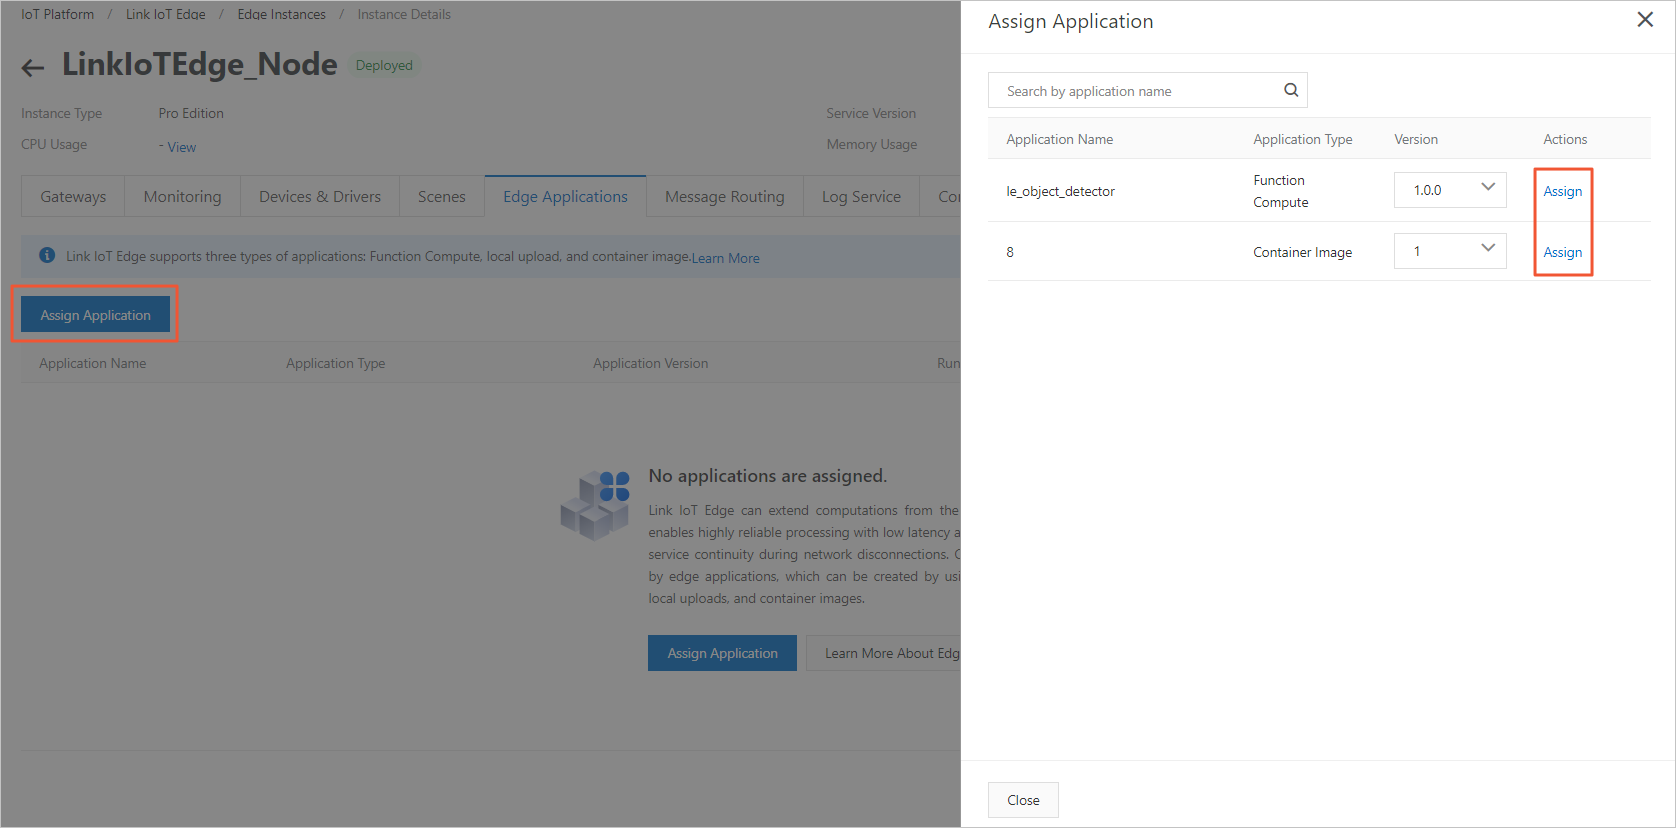 Assign the edge application to the edge instance